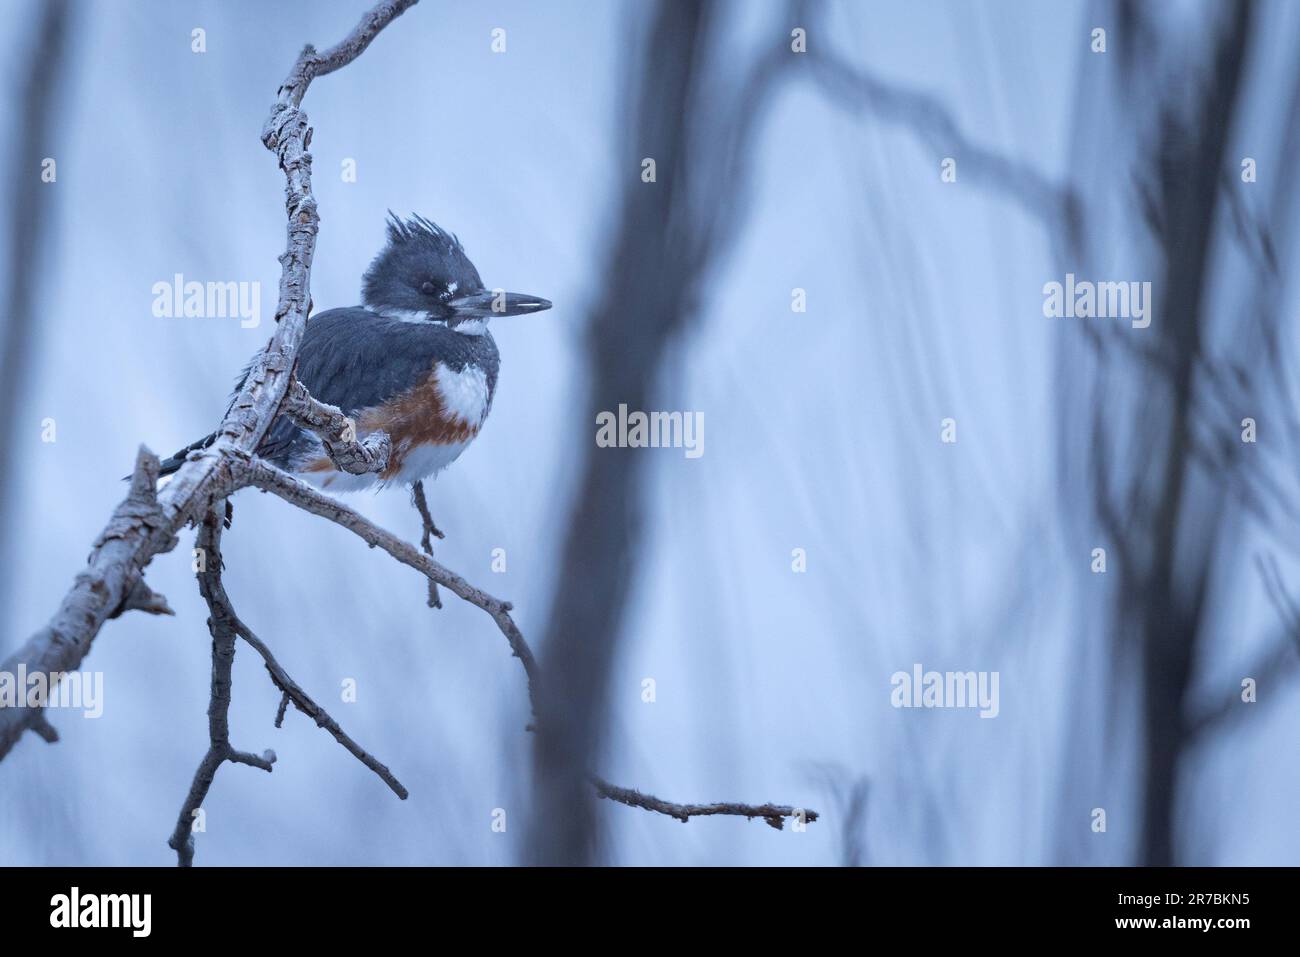 A vibrant Belted Kingfisher perched on a delicate tree branch covered by snow Stock Photo